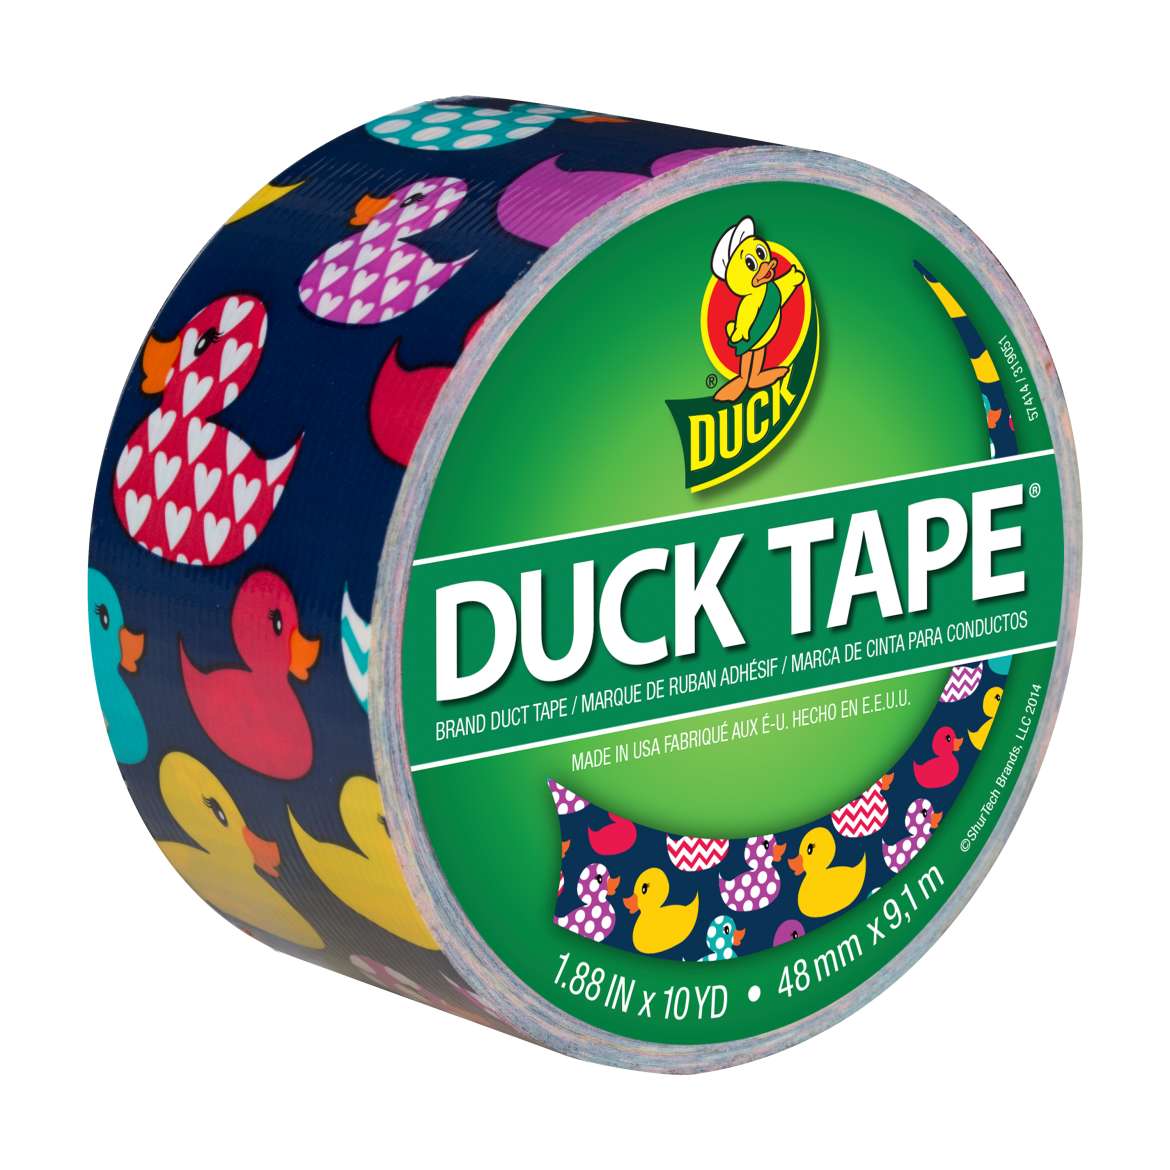 duct tape or duck tape